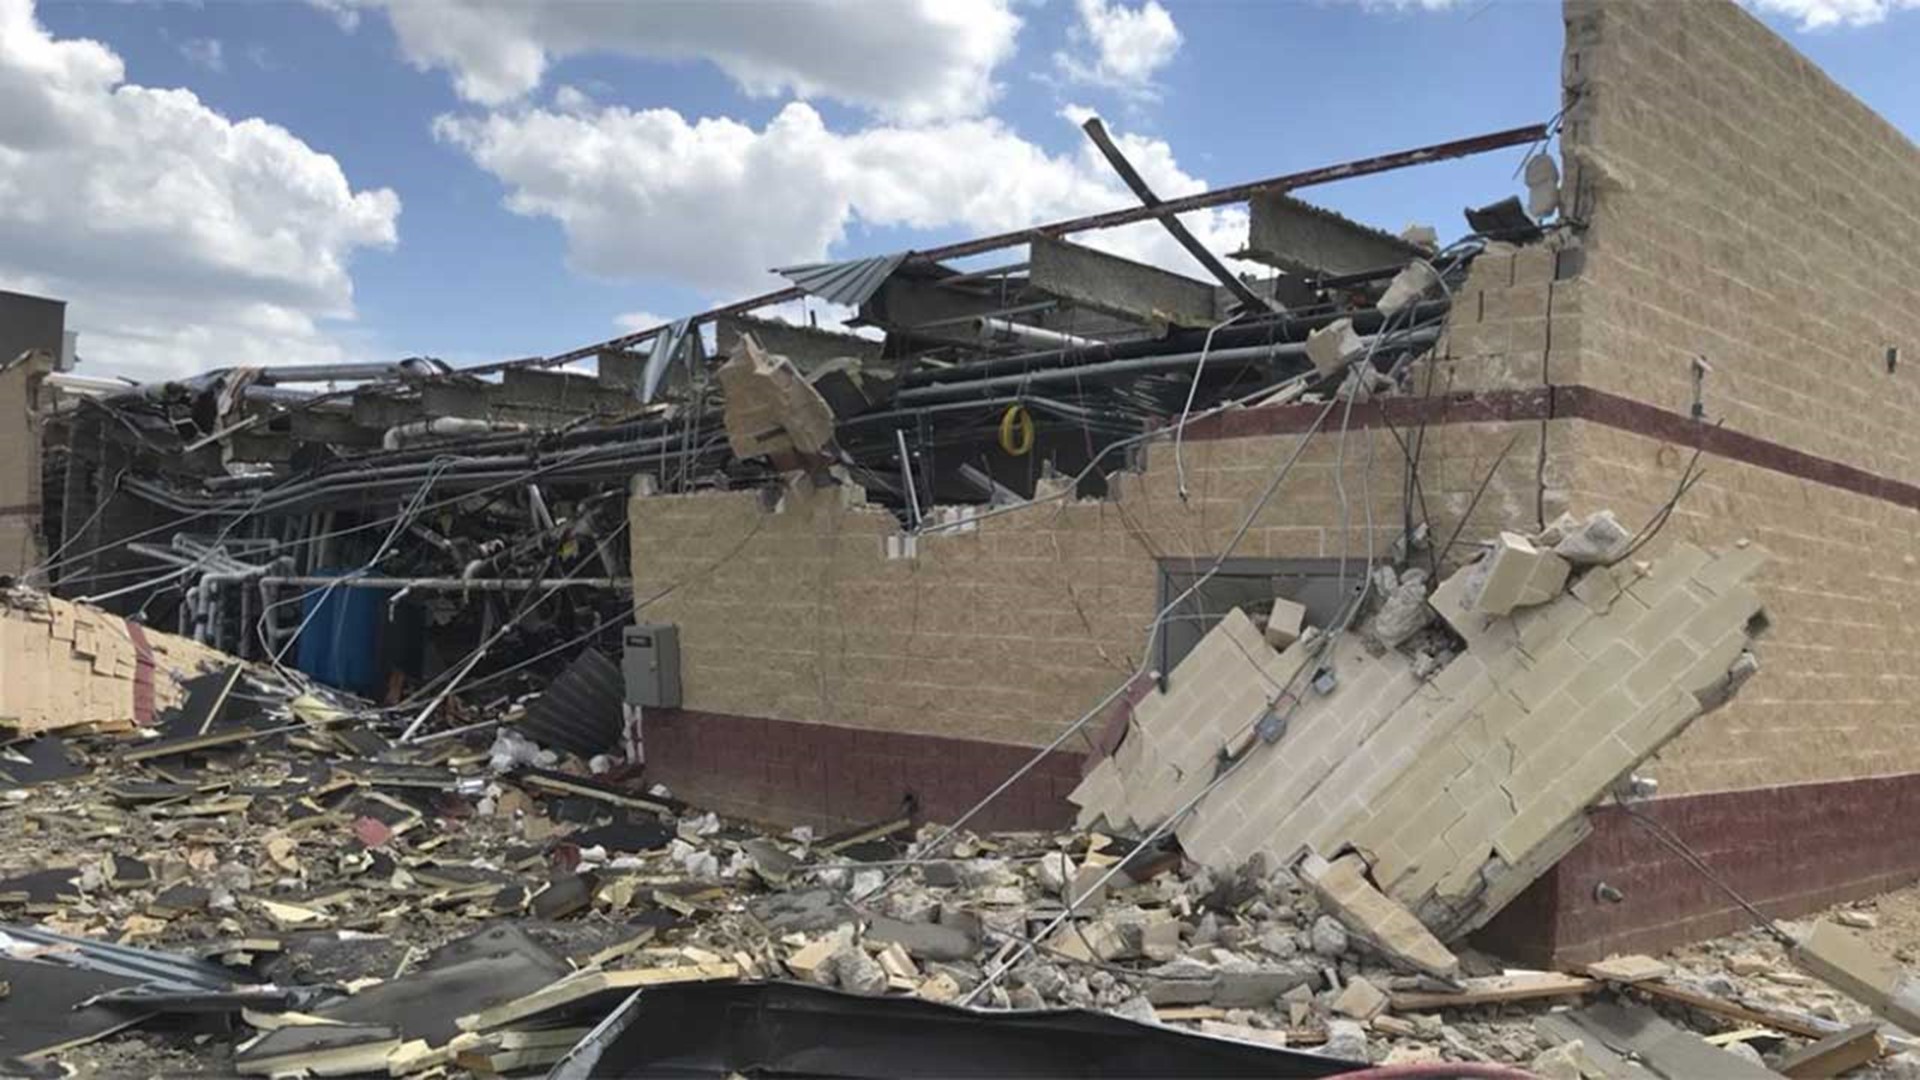 On June 26, 2018 an explosion at a construction site of Coryell Memorial Hospital left three people dead and 13 others injured.